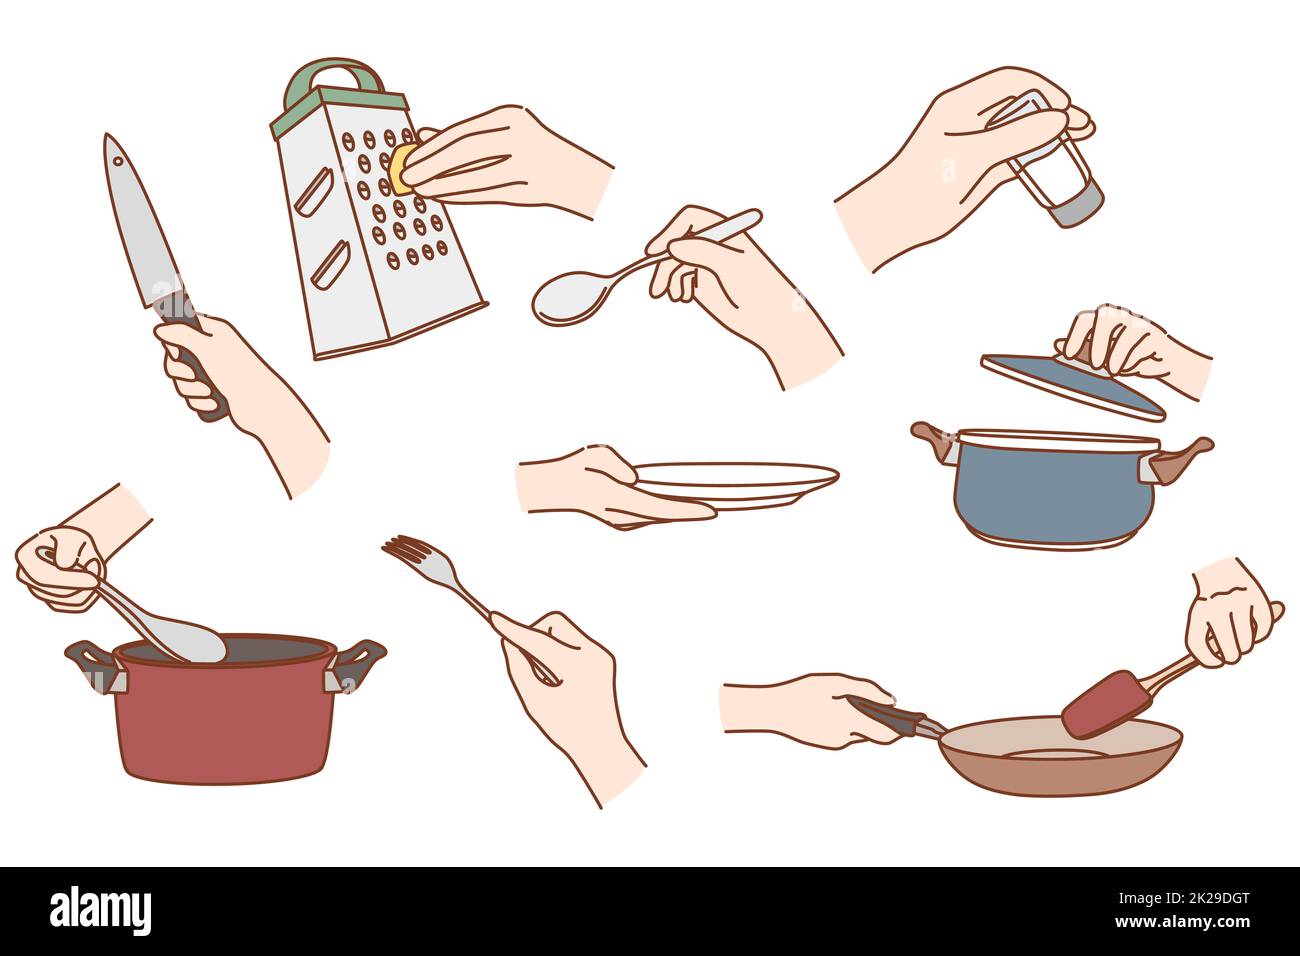 Set of person use kitchen tools cooking Stock Photo